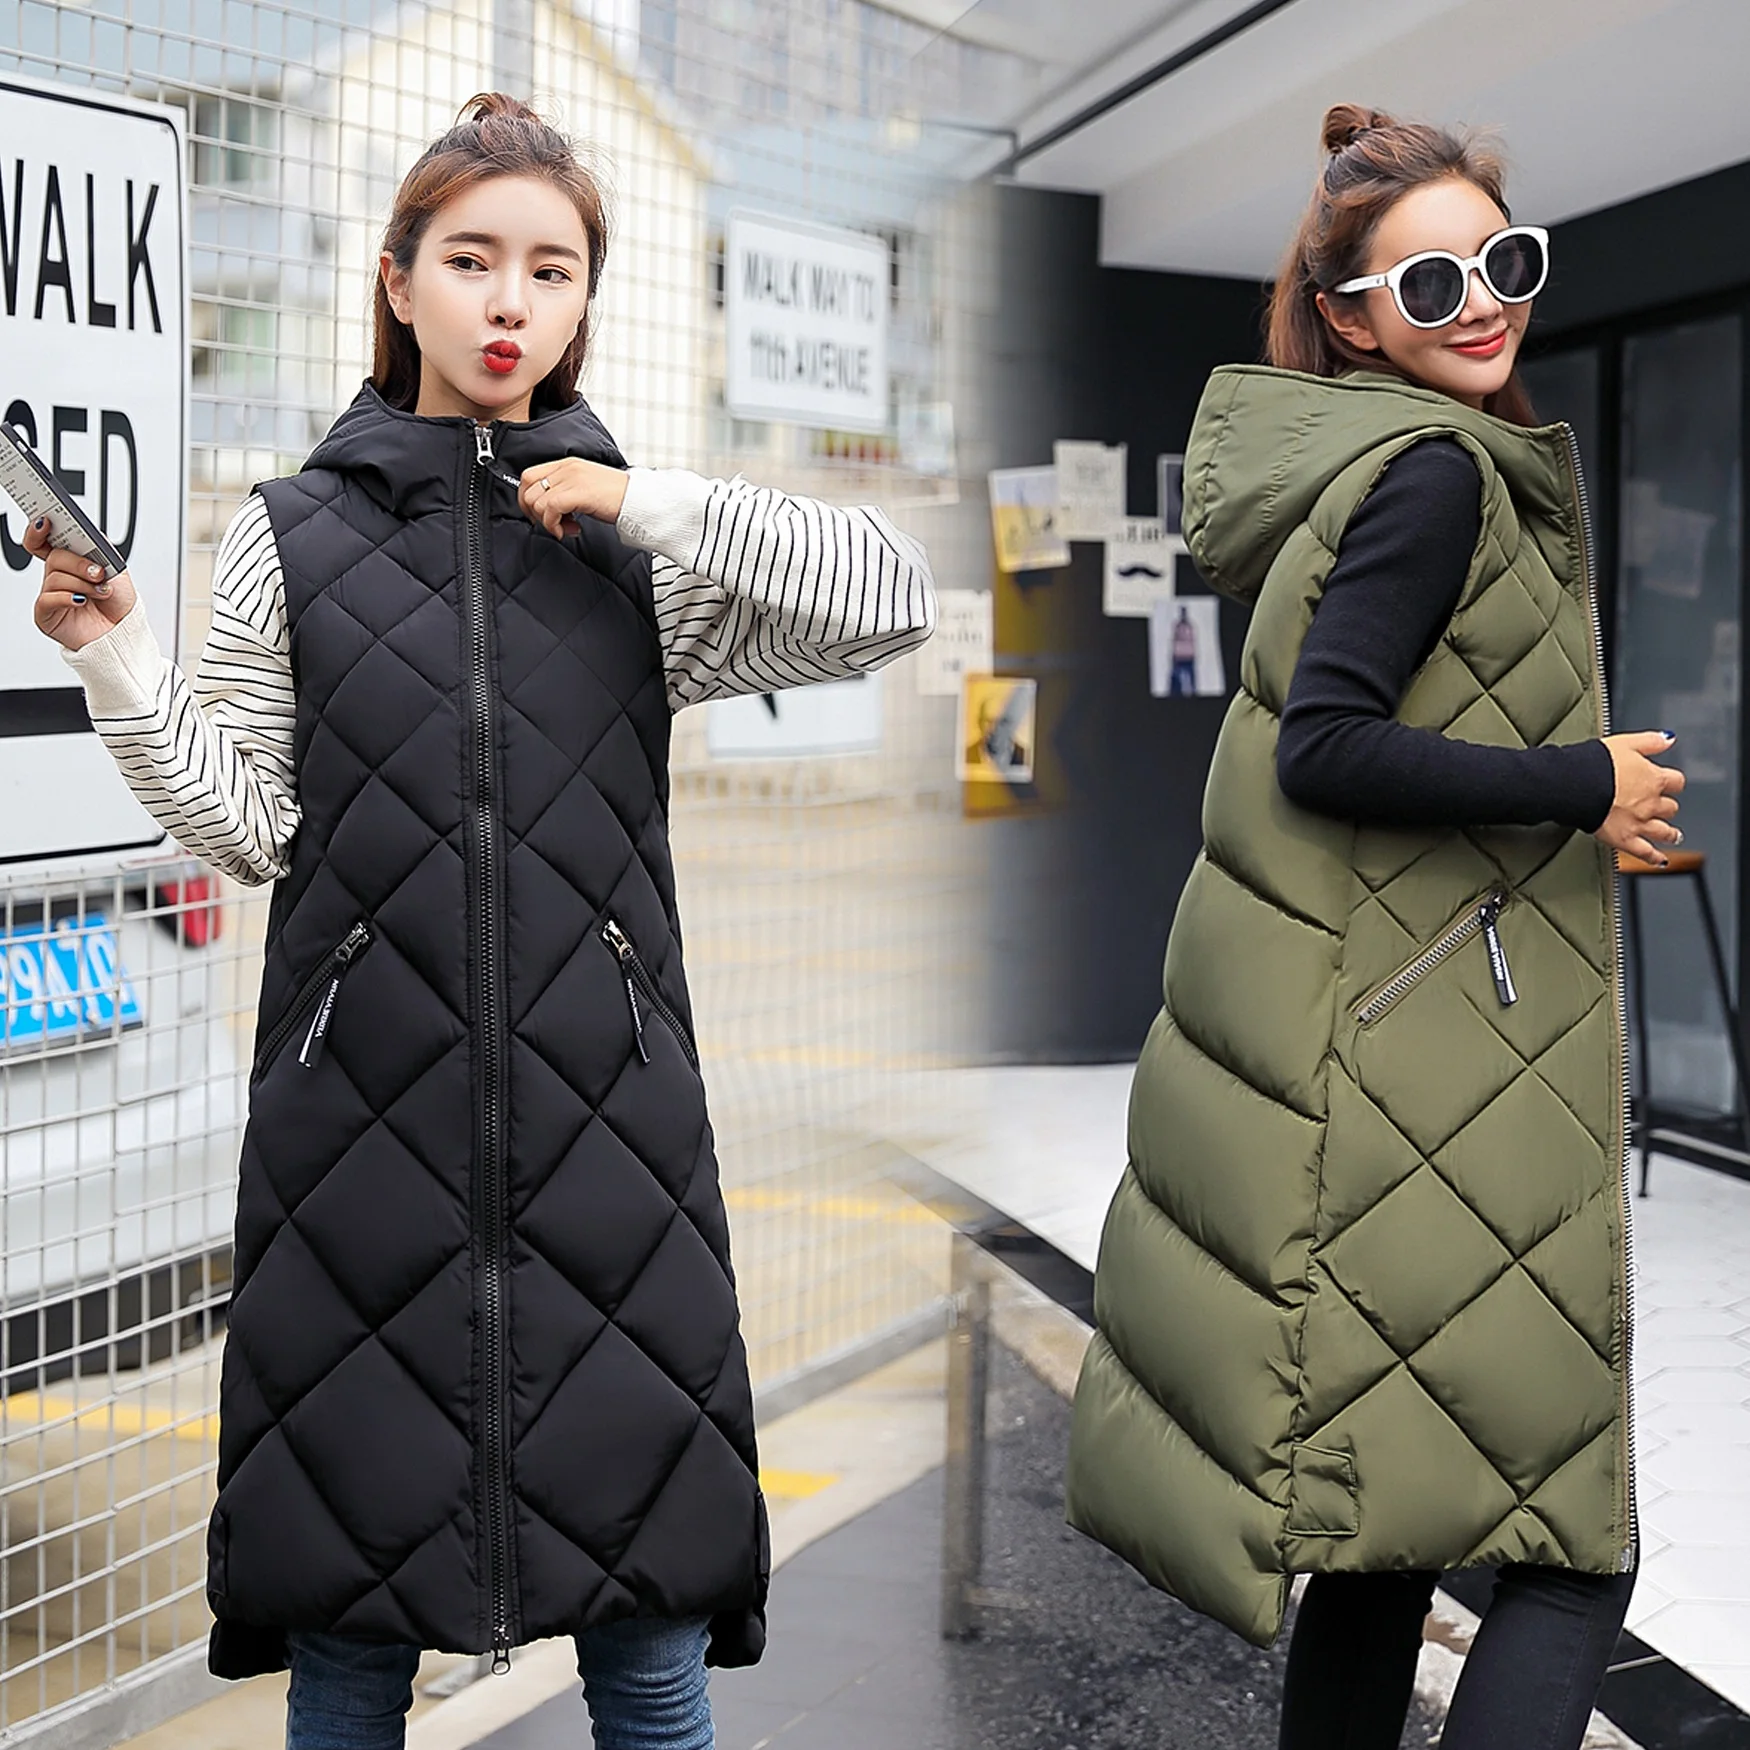 

Cheap Wholesale 2020 New Summer Winter Hot Selling Women's Fashion Casual Warm Jacket Female Bisic Coats Vest for Women